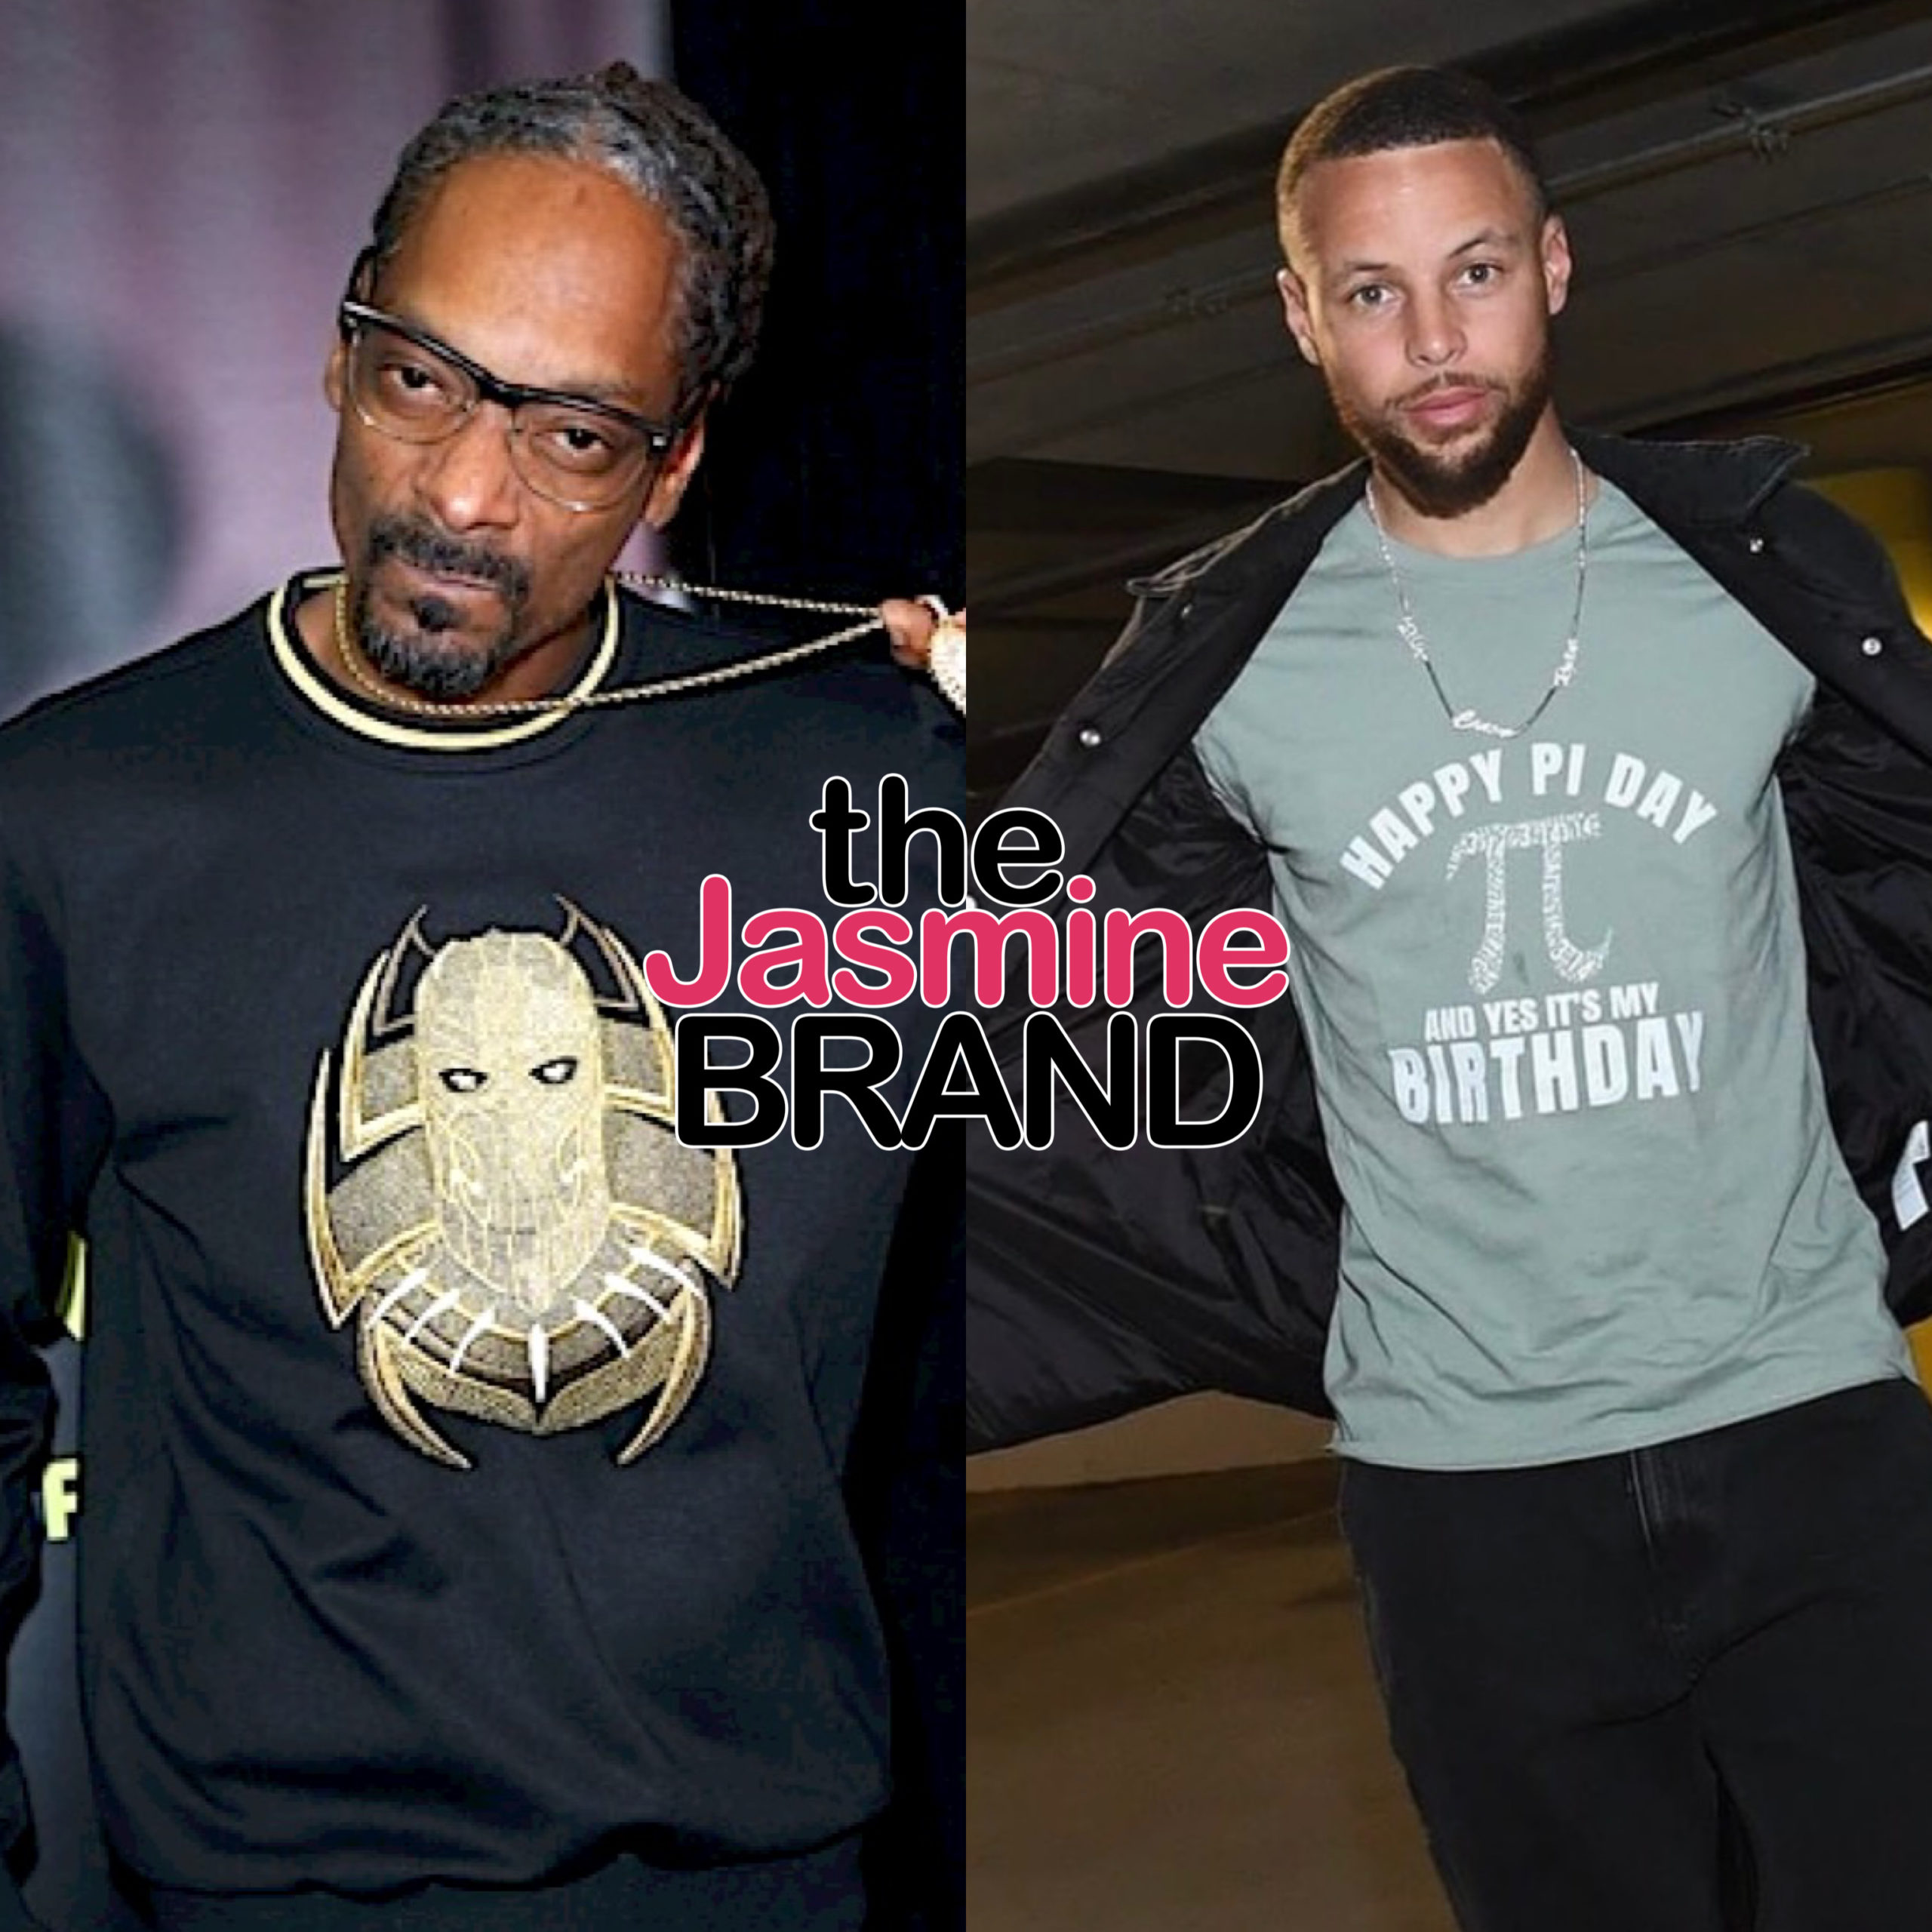 Snoop Dogg Gifts Nba Star Stephen Curry His Own Death Row Records Chain Video Thejasminebrand